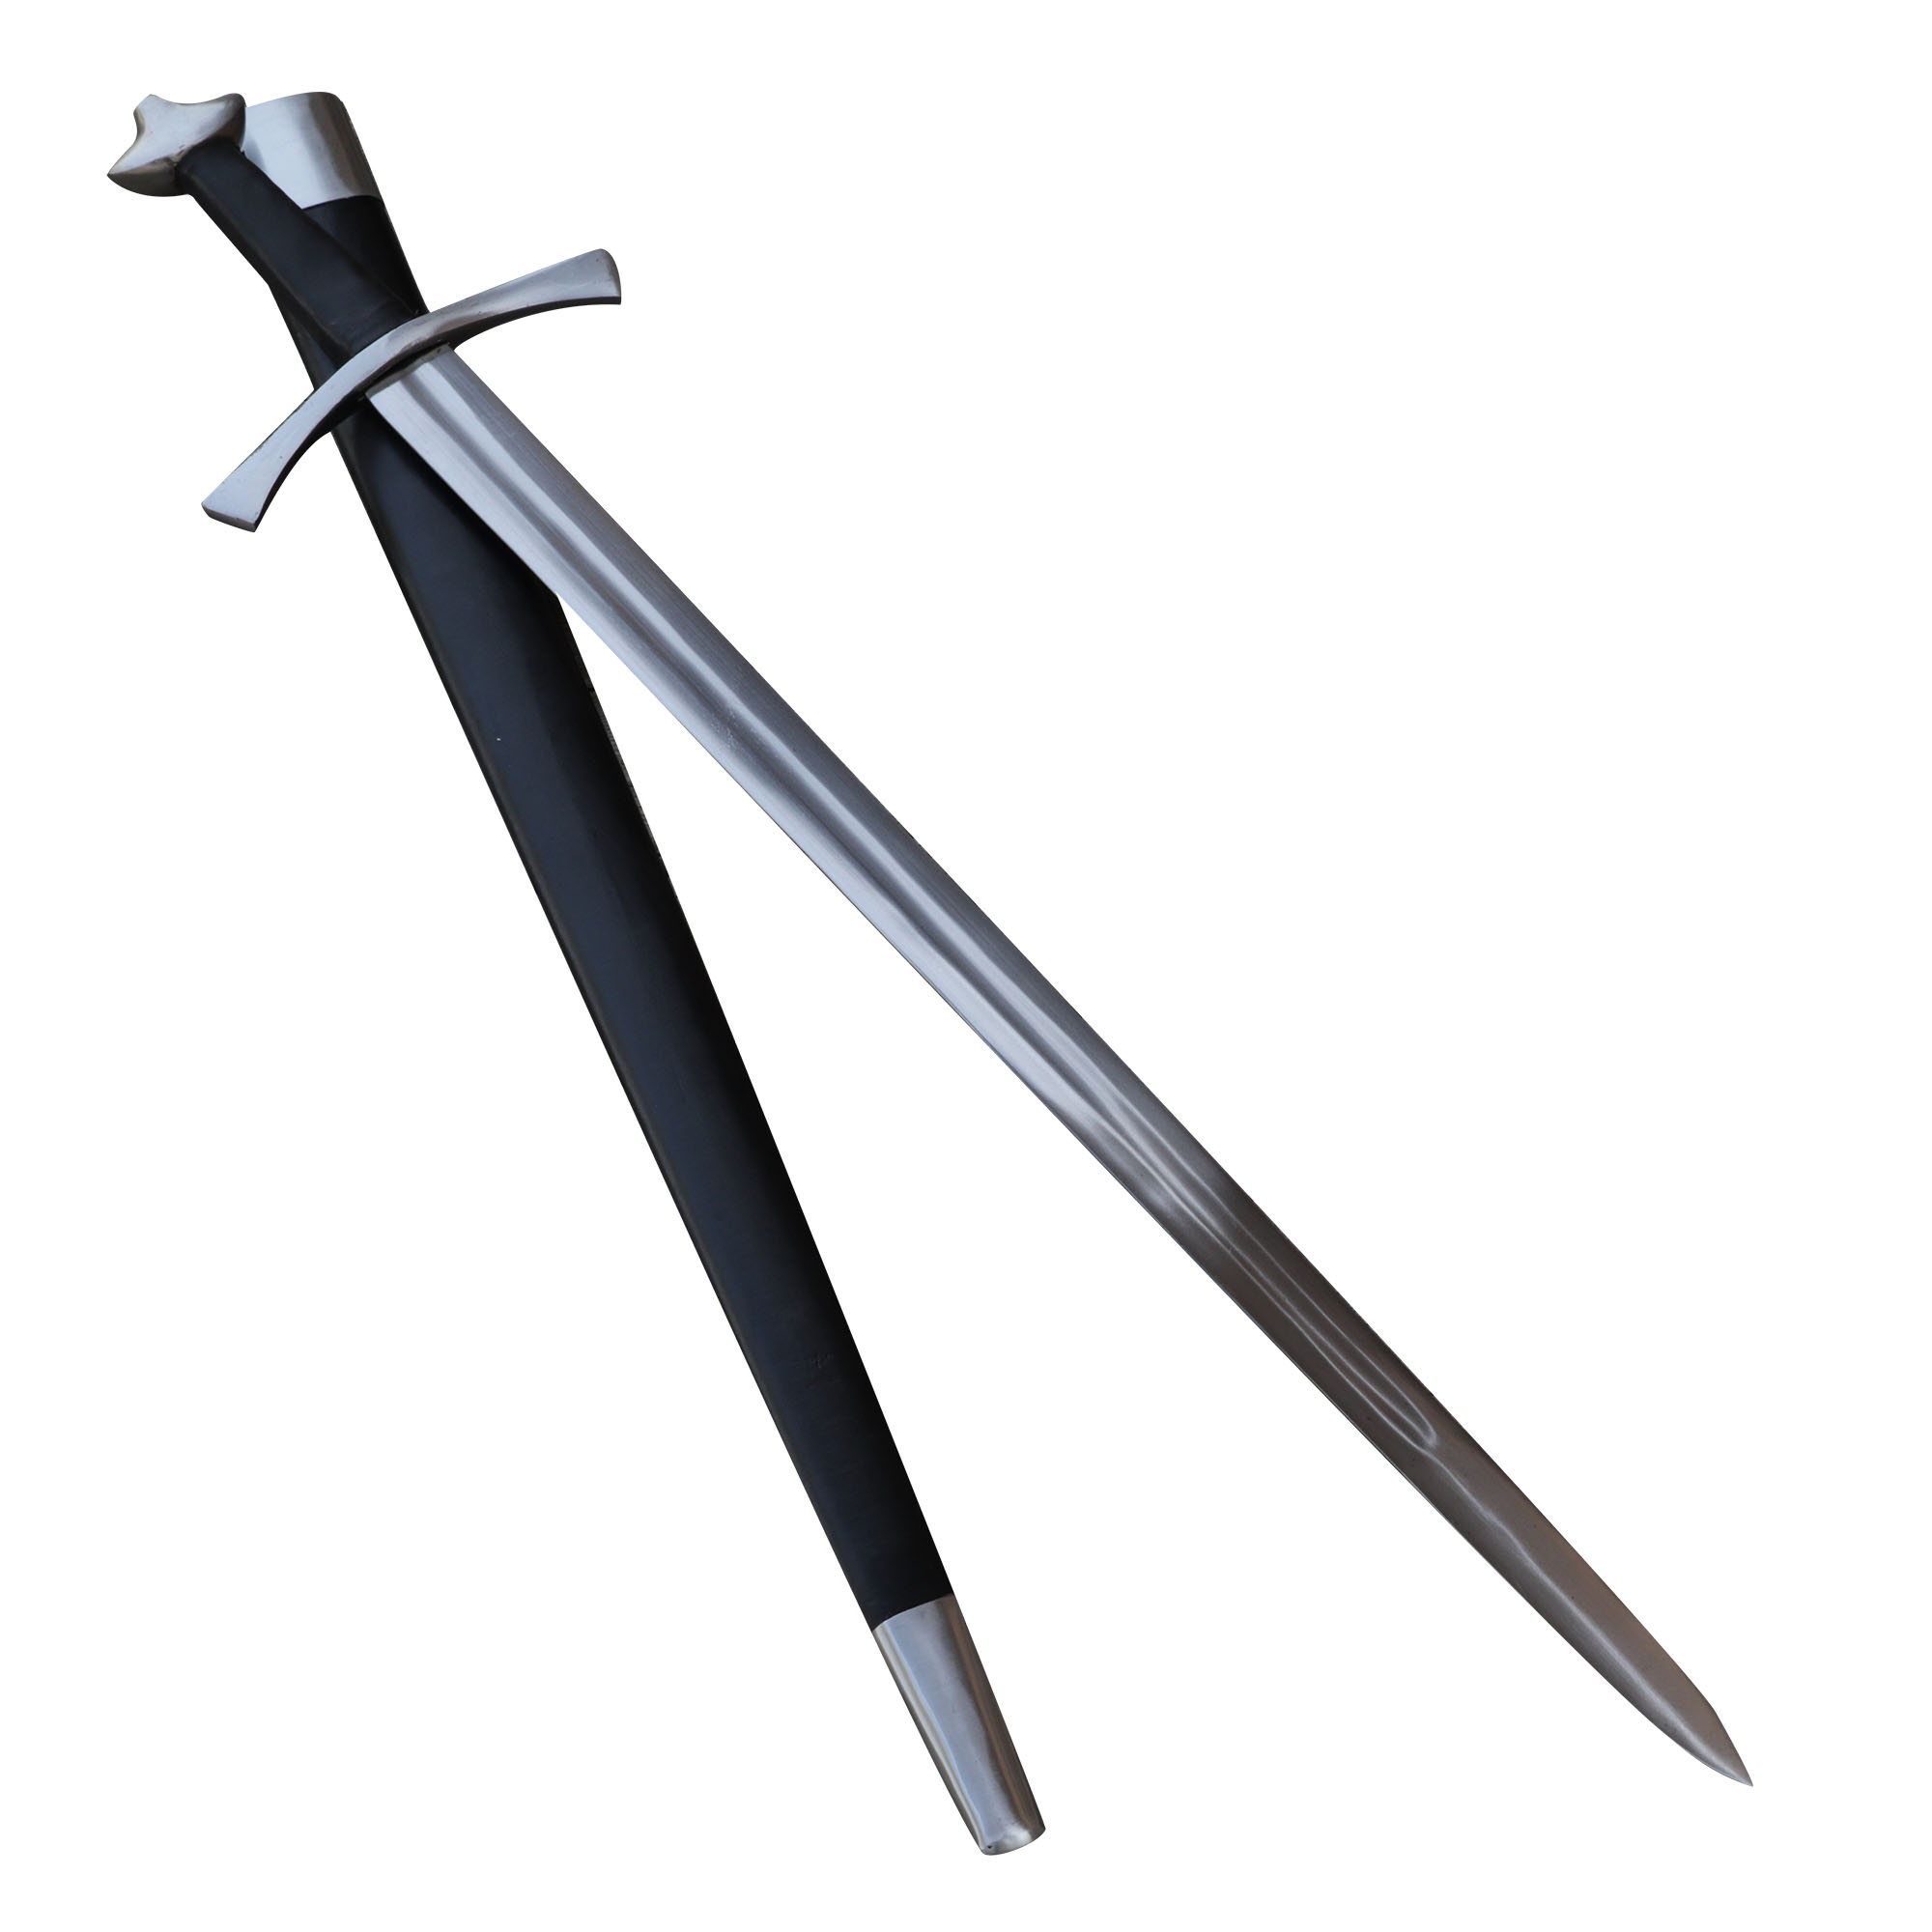 Medieval Knightly Arming Replica Long SWORD | 1065 High Carbon Tempered Steel Blade